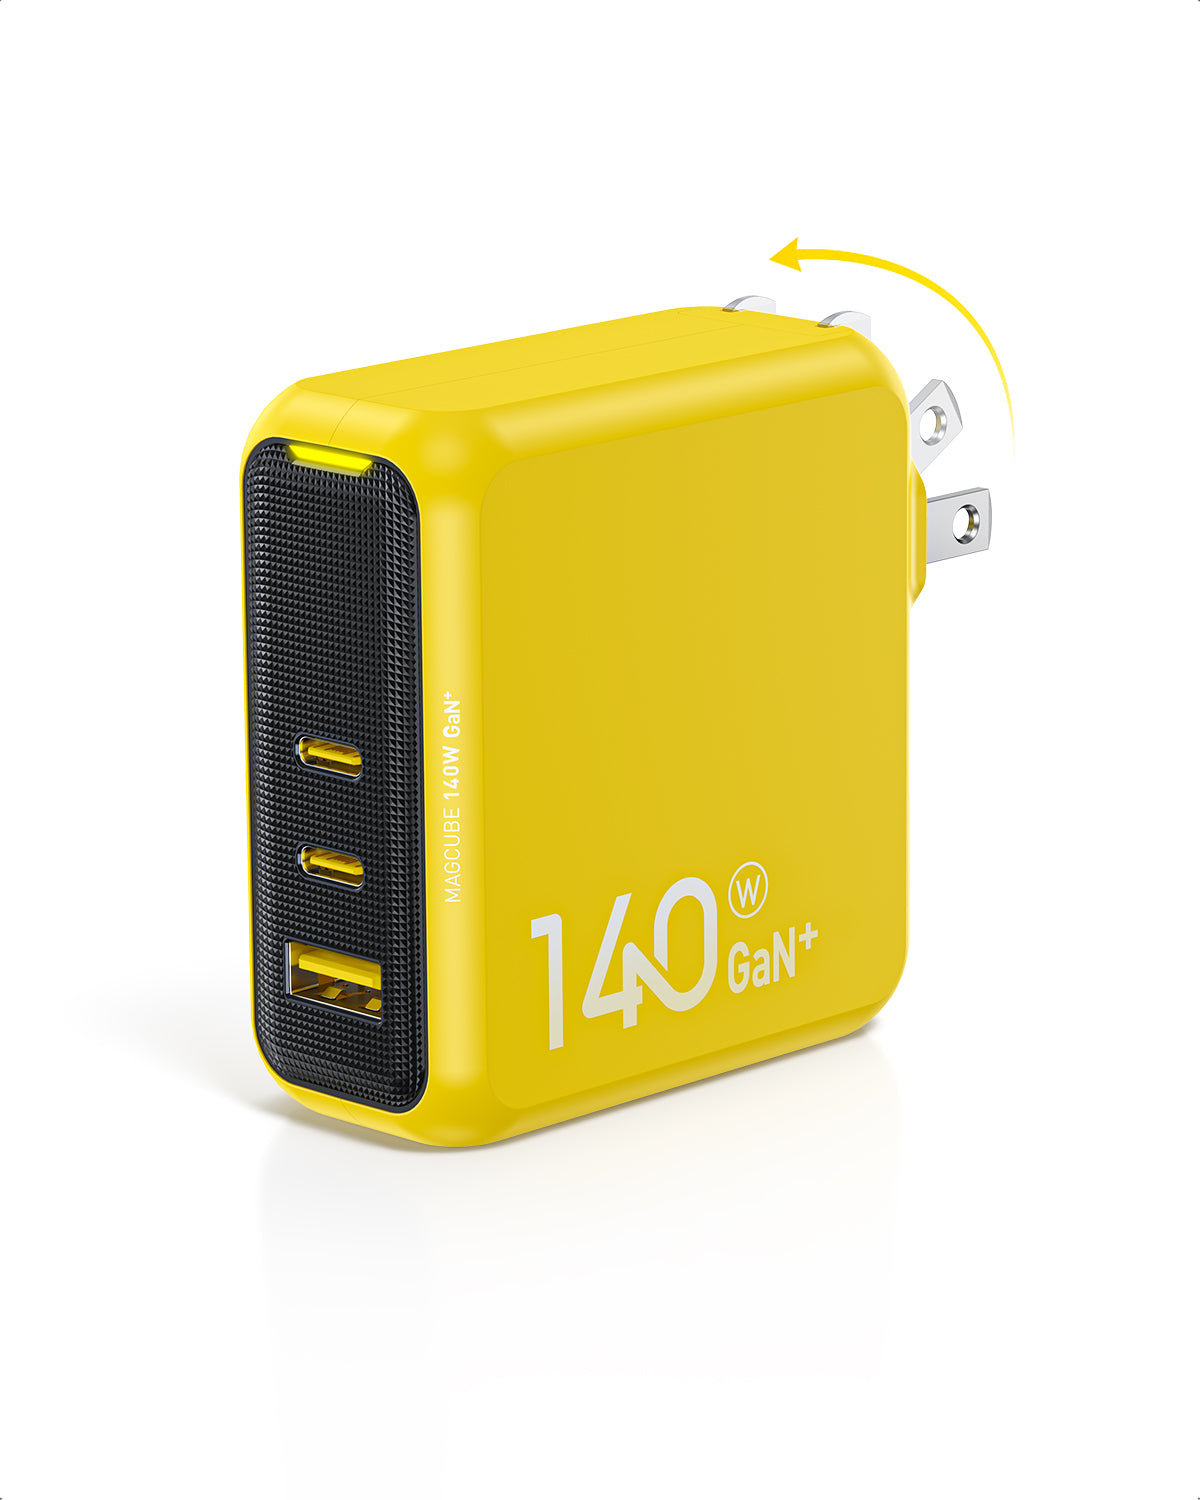 This 4-Port GaN fast charger offers 140 Watts from a single port